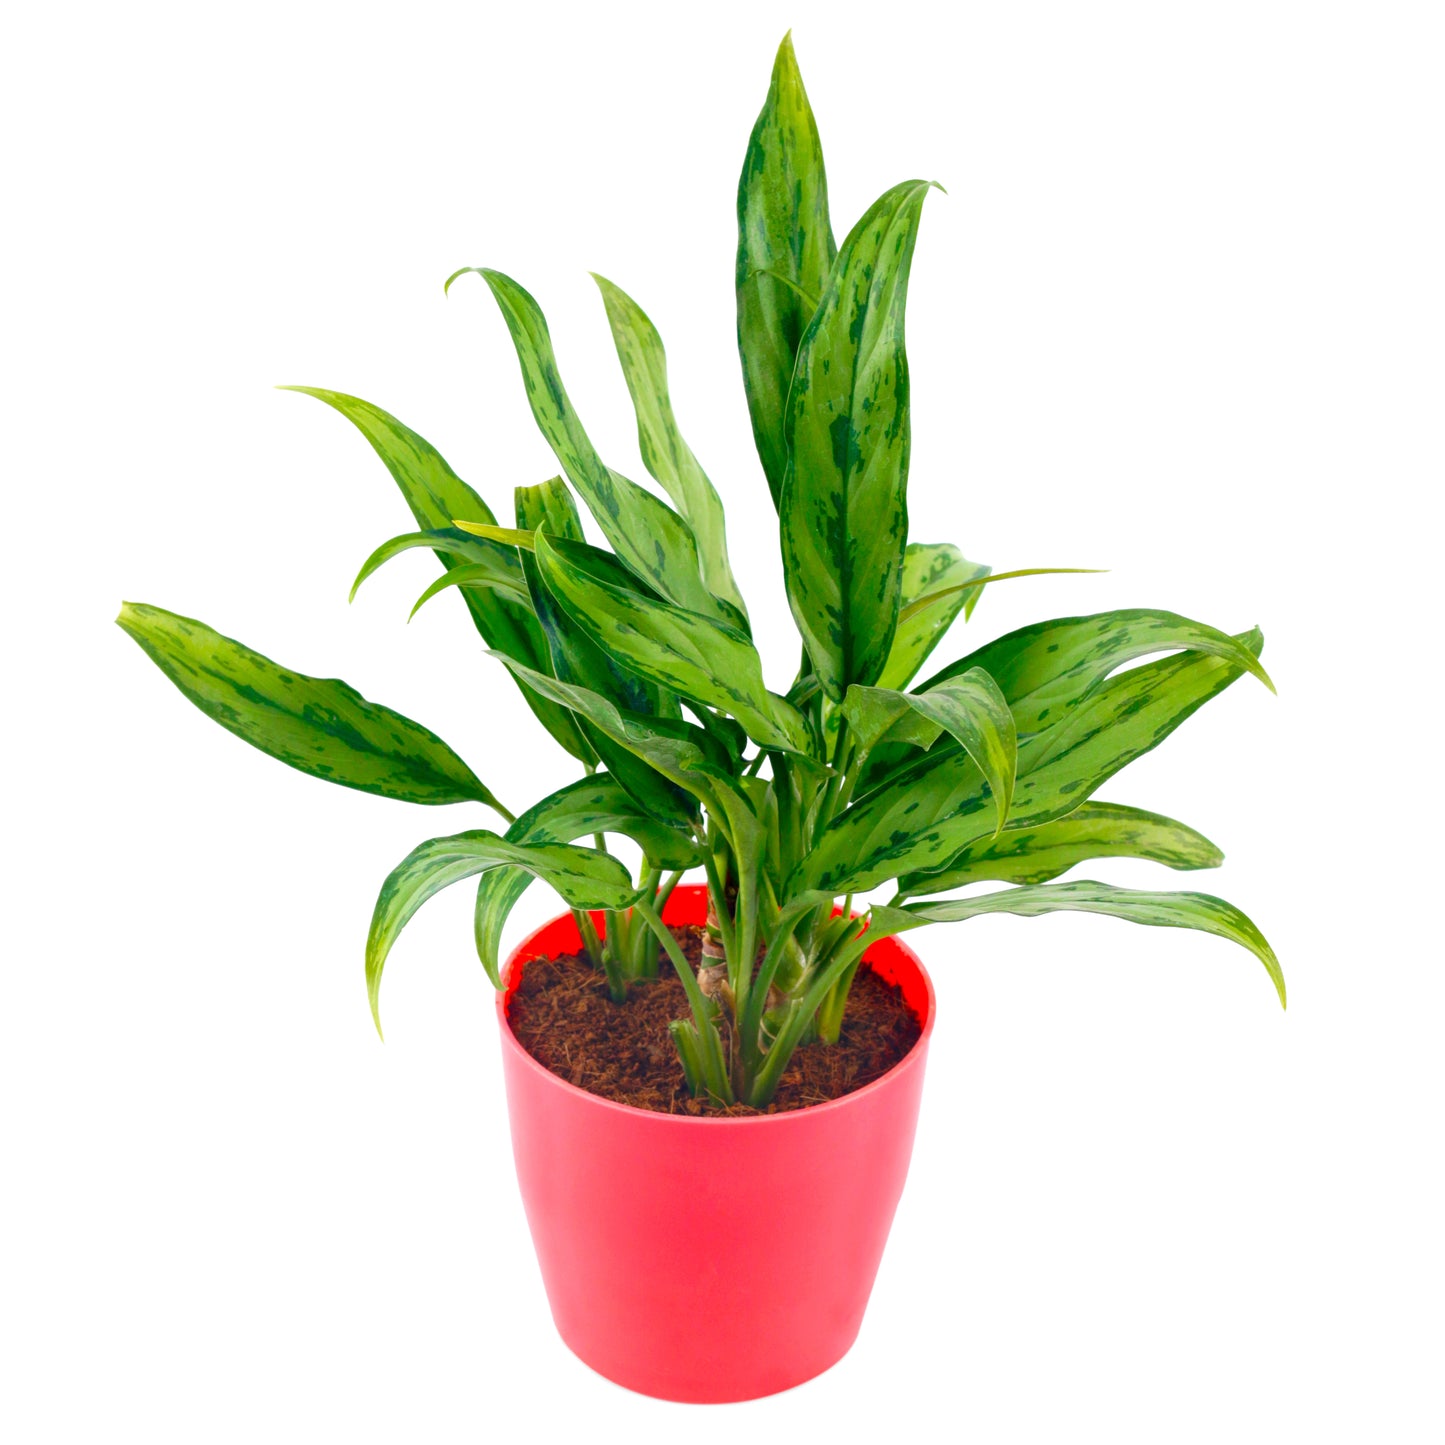 Aglaonema Green live Plant in Red Round Pot